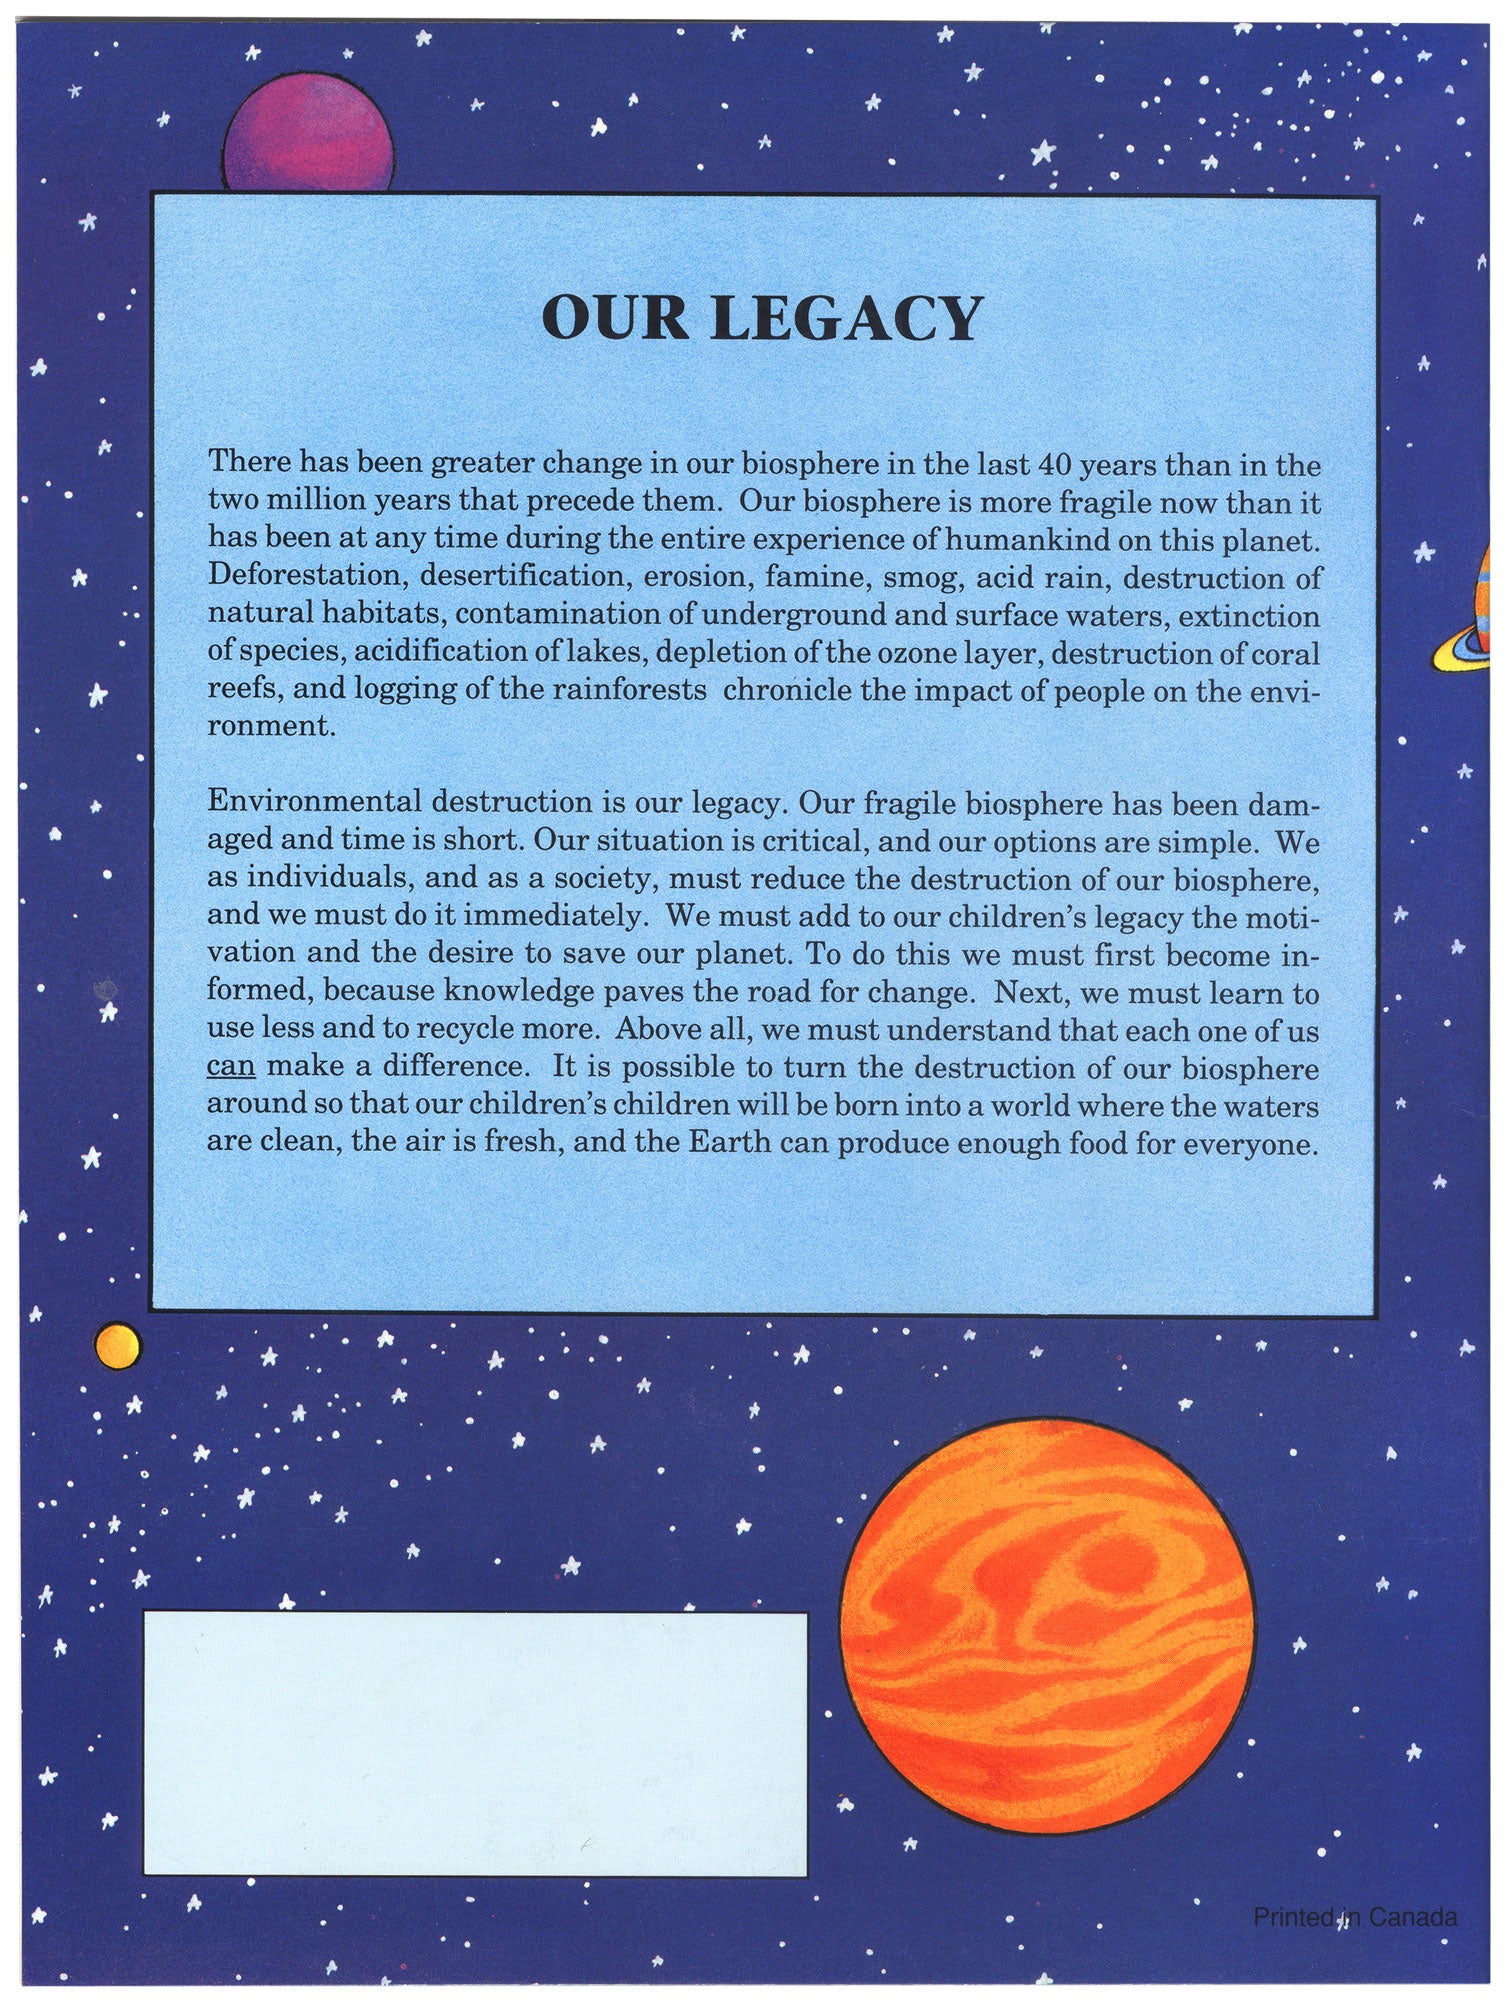 The back of the book with illustrations of planets and stars. There is a summery of the book in the back. End of image description.